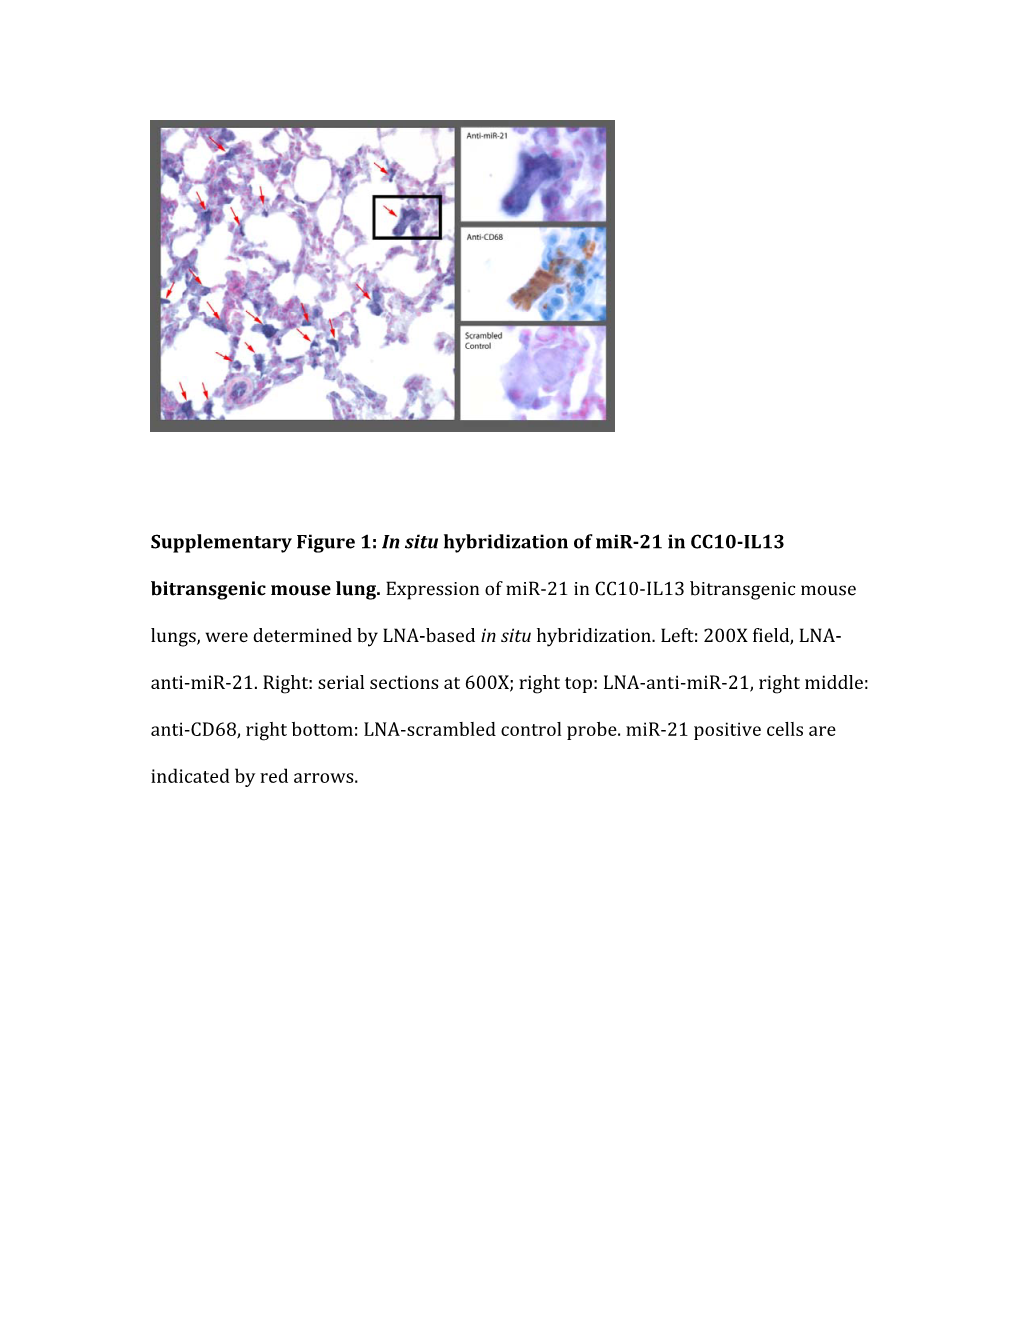 Supplementary Figure 1: in Situ Hybridization of Mir-21 in CC10-IL13 Bitransgenic Mouse Lung